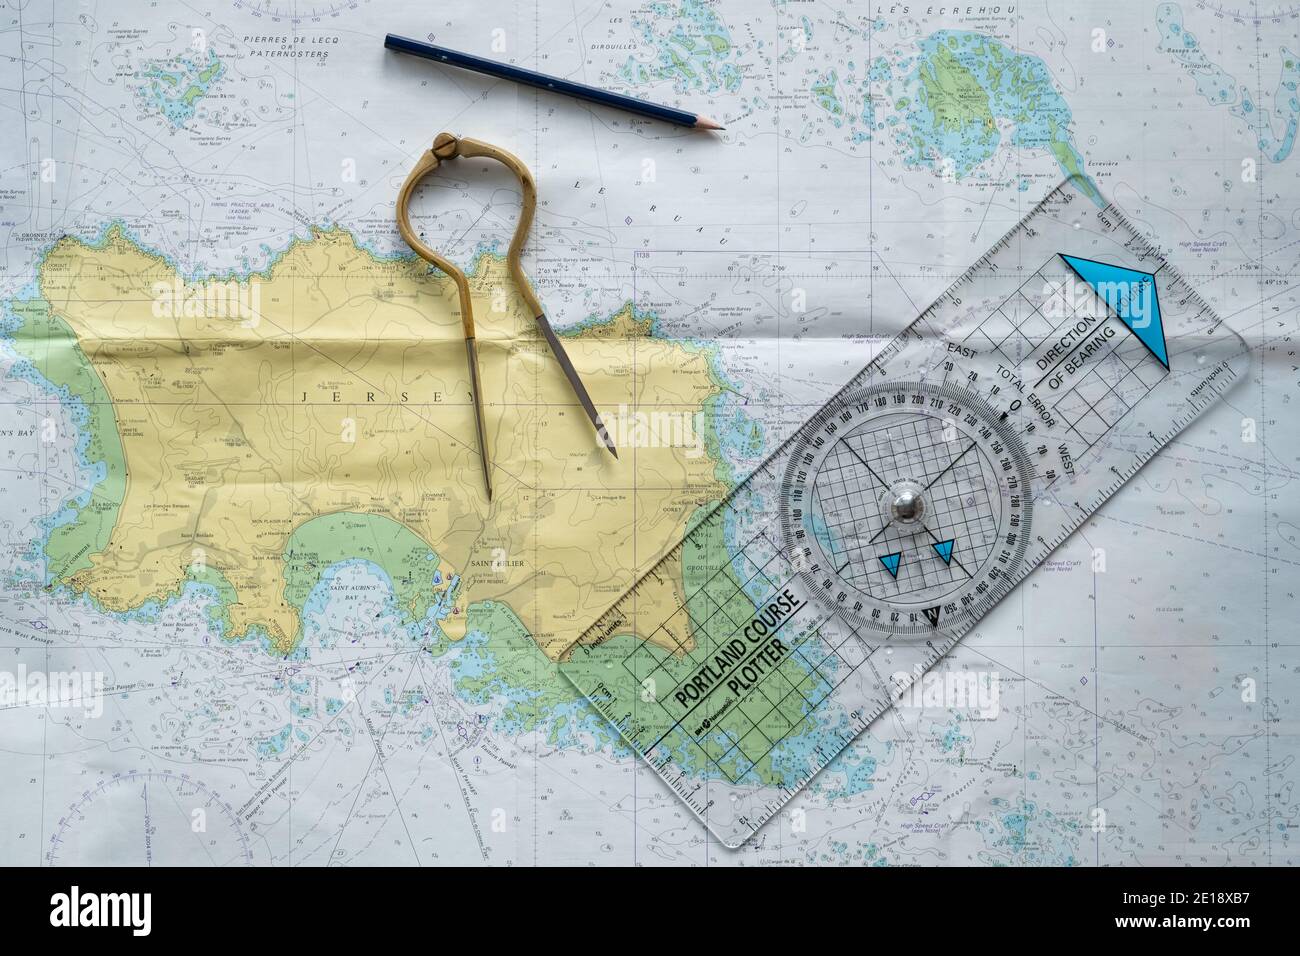 Sea chart, Jersey, Channel Islands, with course plotting tools. Compass, Protractor, Plotter, Pencil. Stock Photo